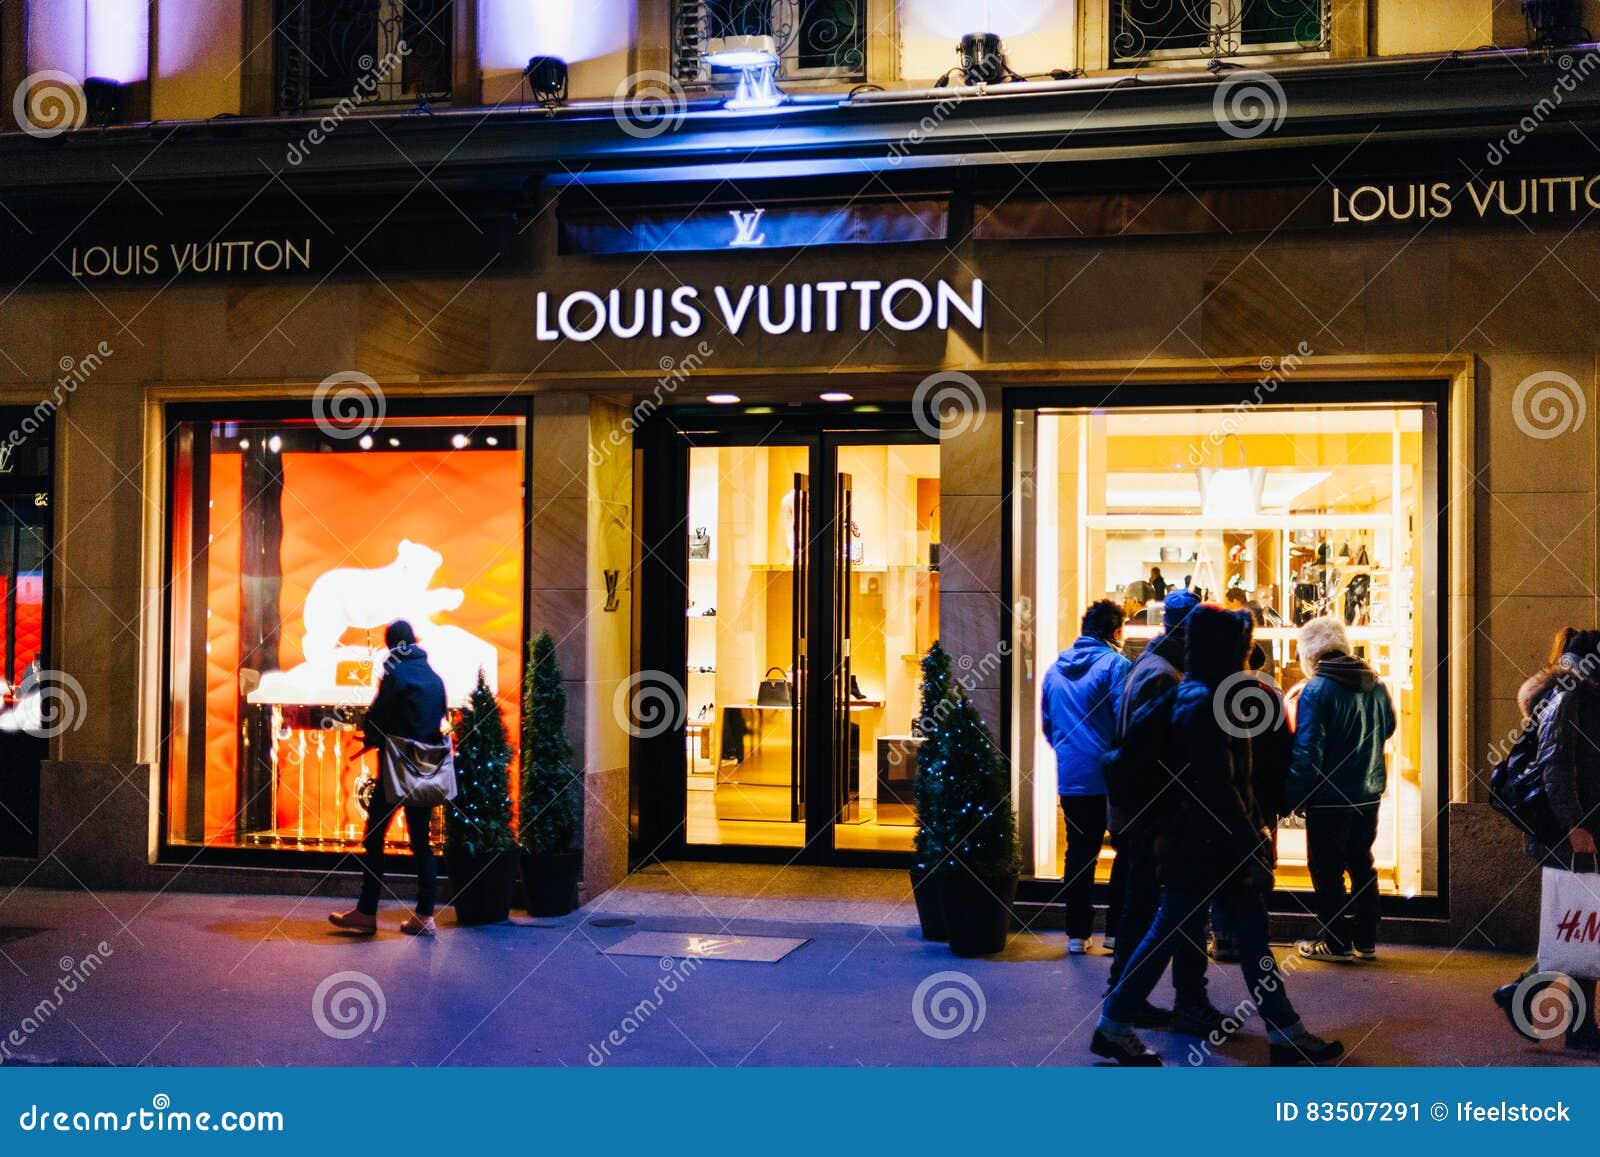 LOUIS VUITTON DECORATES CHRISTMAS with THIER ITEMS Editorial Photo